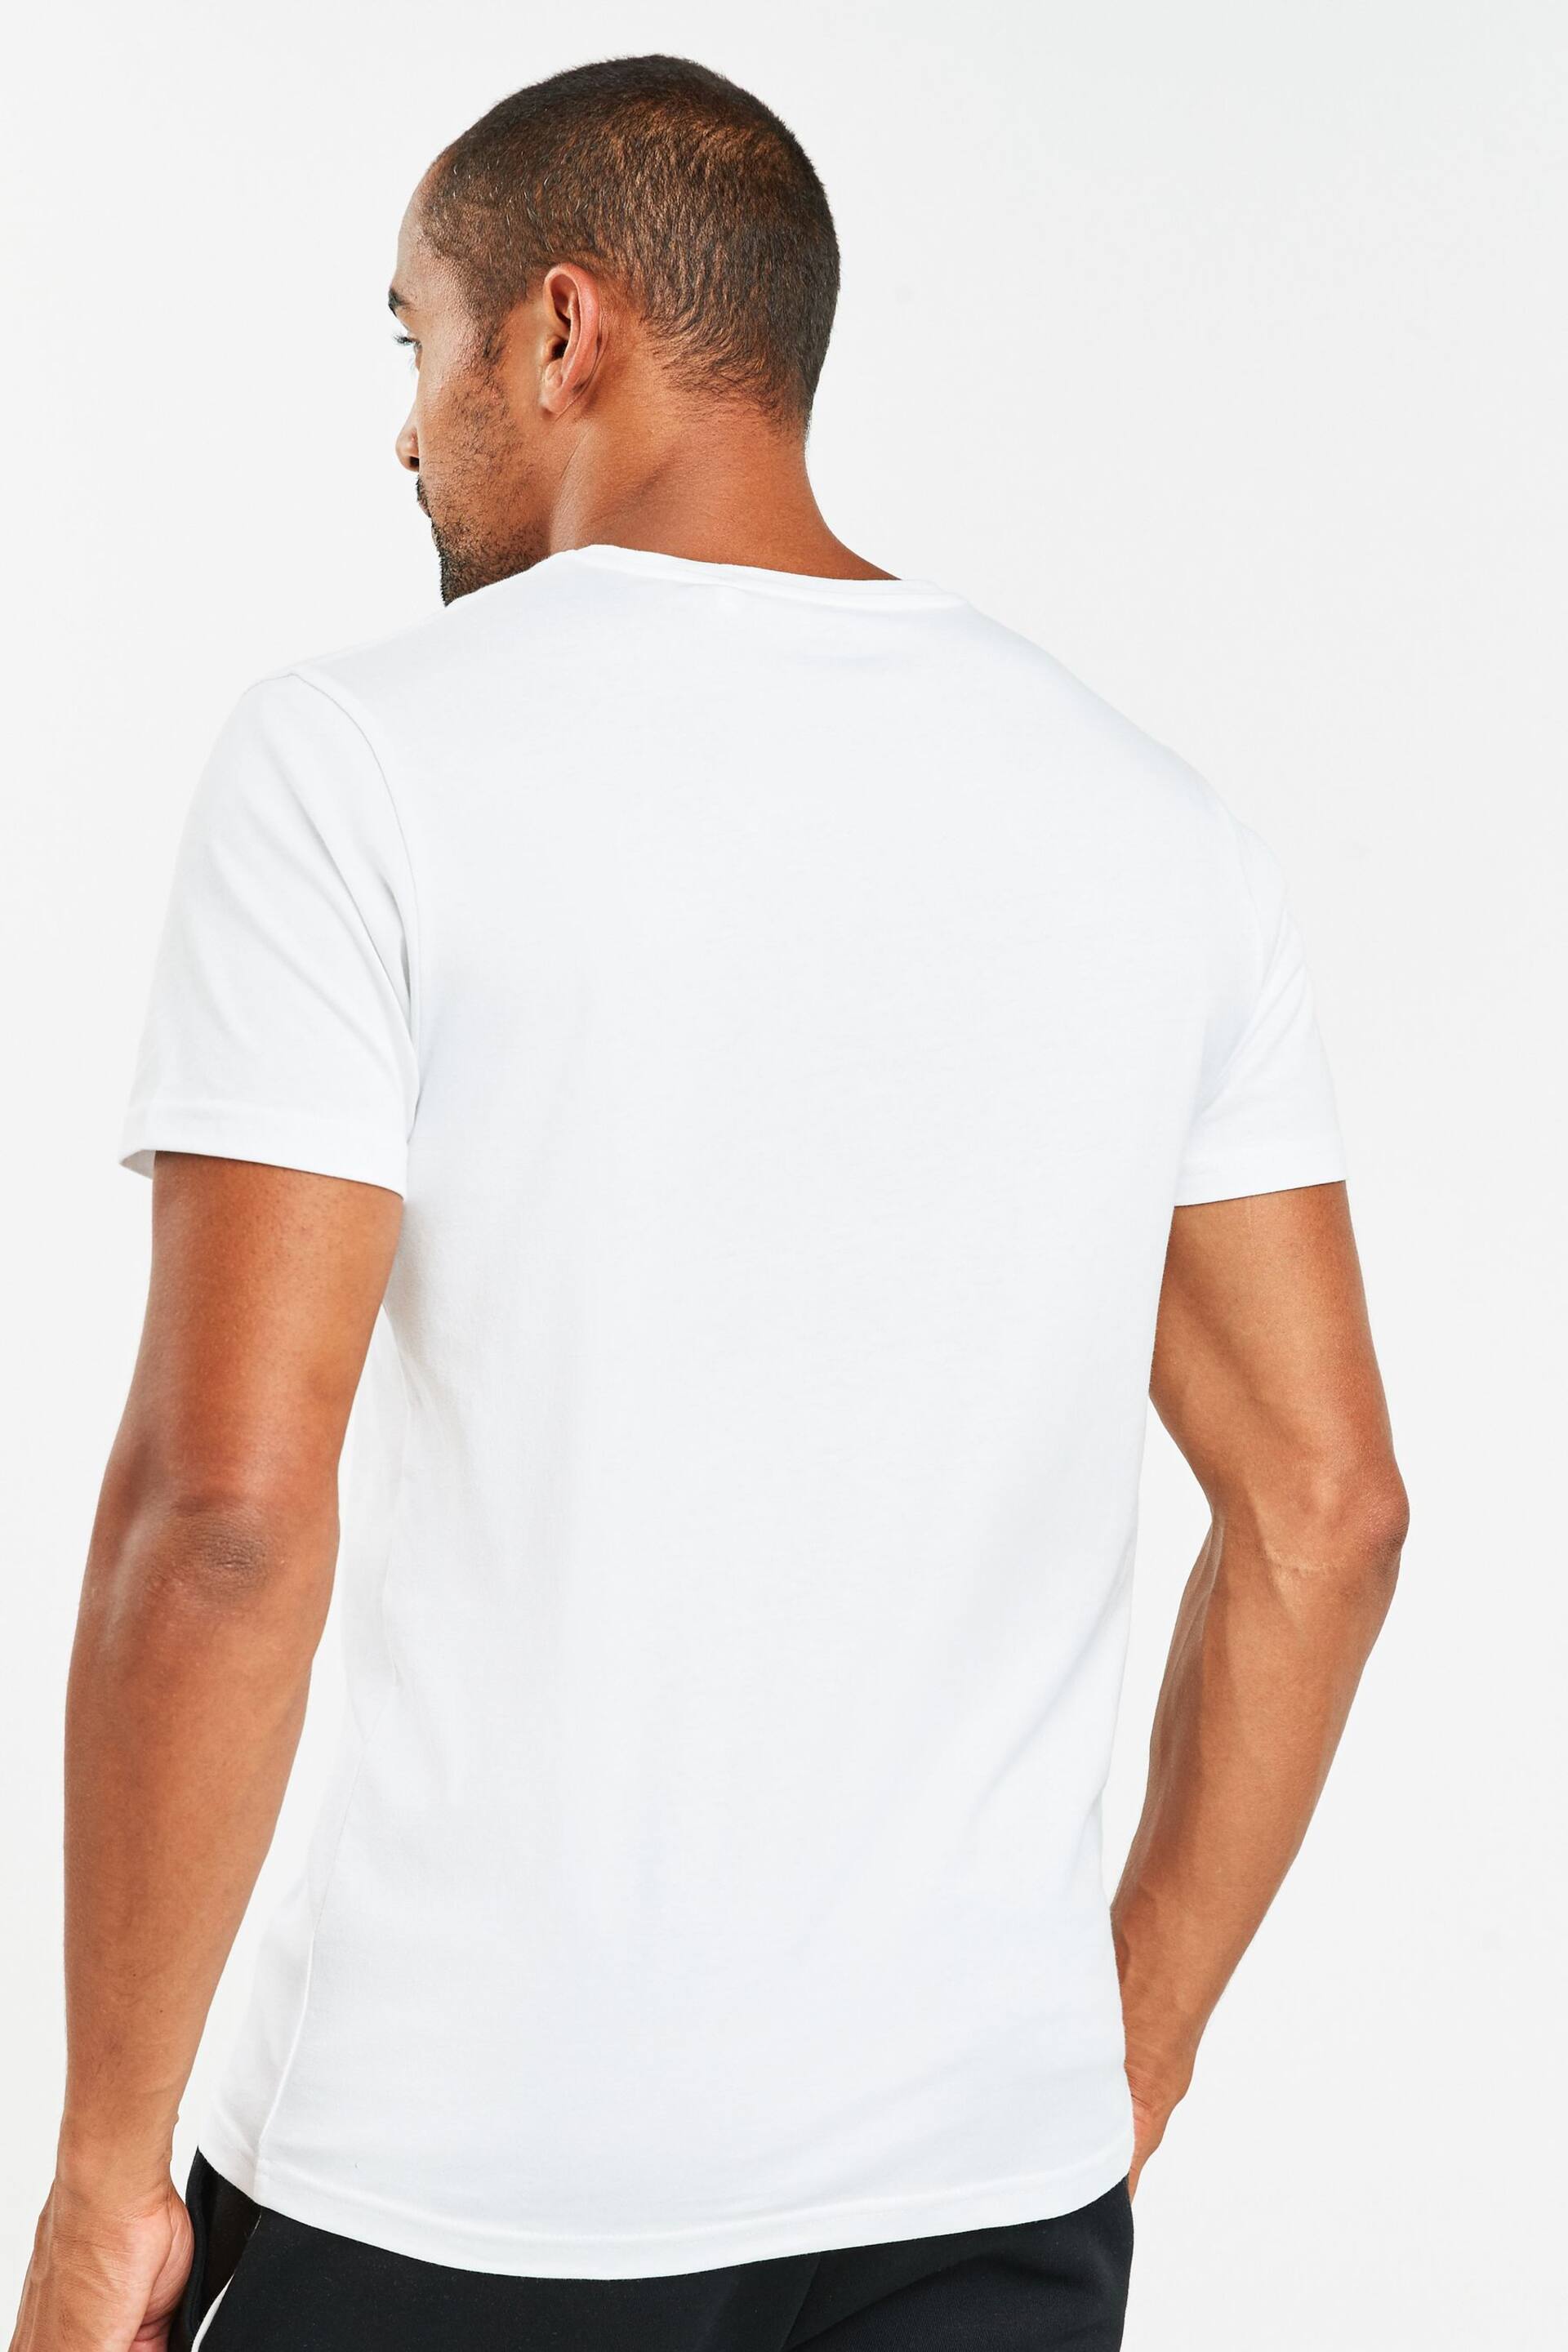 White T-Shirts 5 Pack - Image 4 of 4